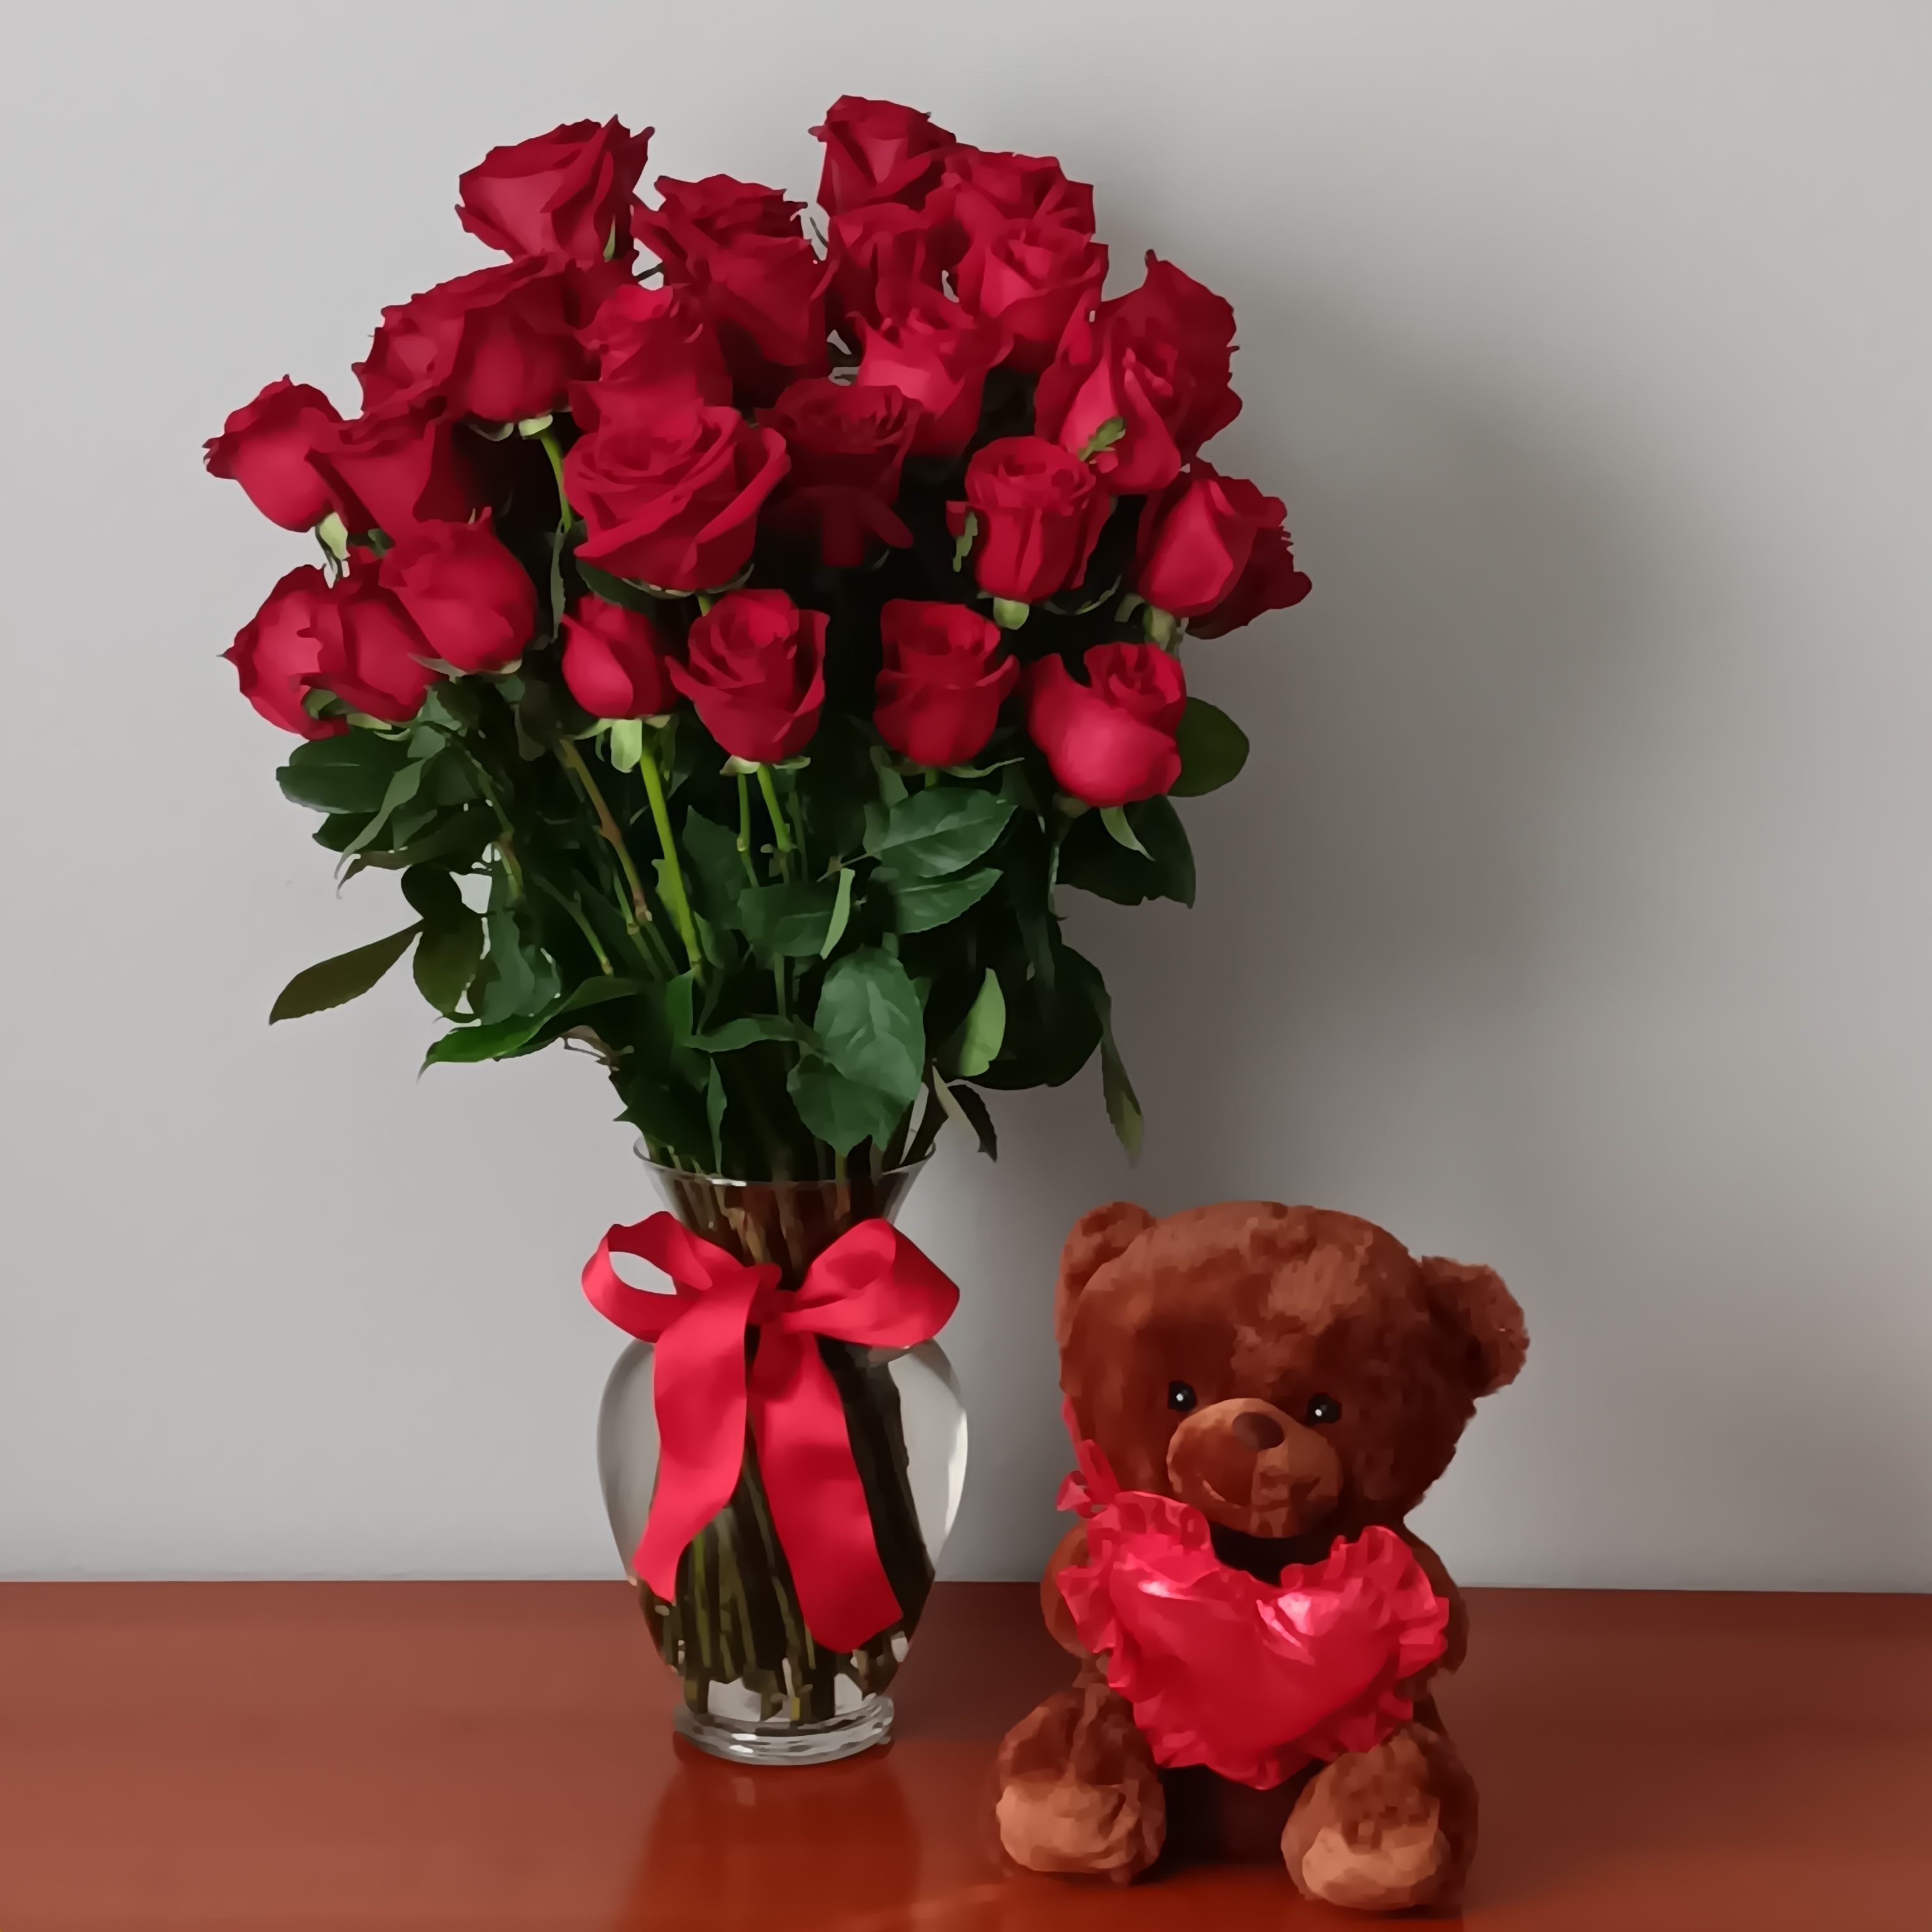 Always on My Mind - 48 Long Stemmed Red Roses with Medium  Bear - You can't go wrong with red roses - for a birthday, anniversary or any loving occasion. A favorite throughout the ages, they have a rare mystique. Express your love with 48 red roses in a sparkling spring garden vase. She'll get your message. 48 red roses are arranged with salal and pitta negra in a spring garden vase. Orientation: All-Around  SUBSTITUTION POLICY – Always deliver the freshest flowers! Please note the bouquet pictured reflects our original design.  If the exact flowers or container in this arrangement are not available, our local florists will create a beautiful bouquet with the freshest available flowers.